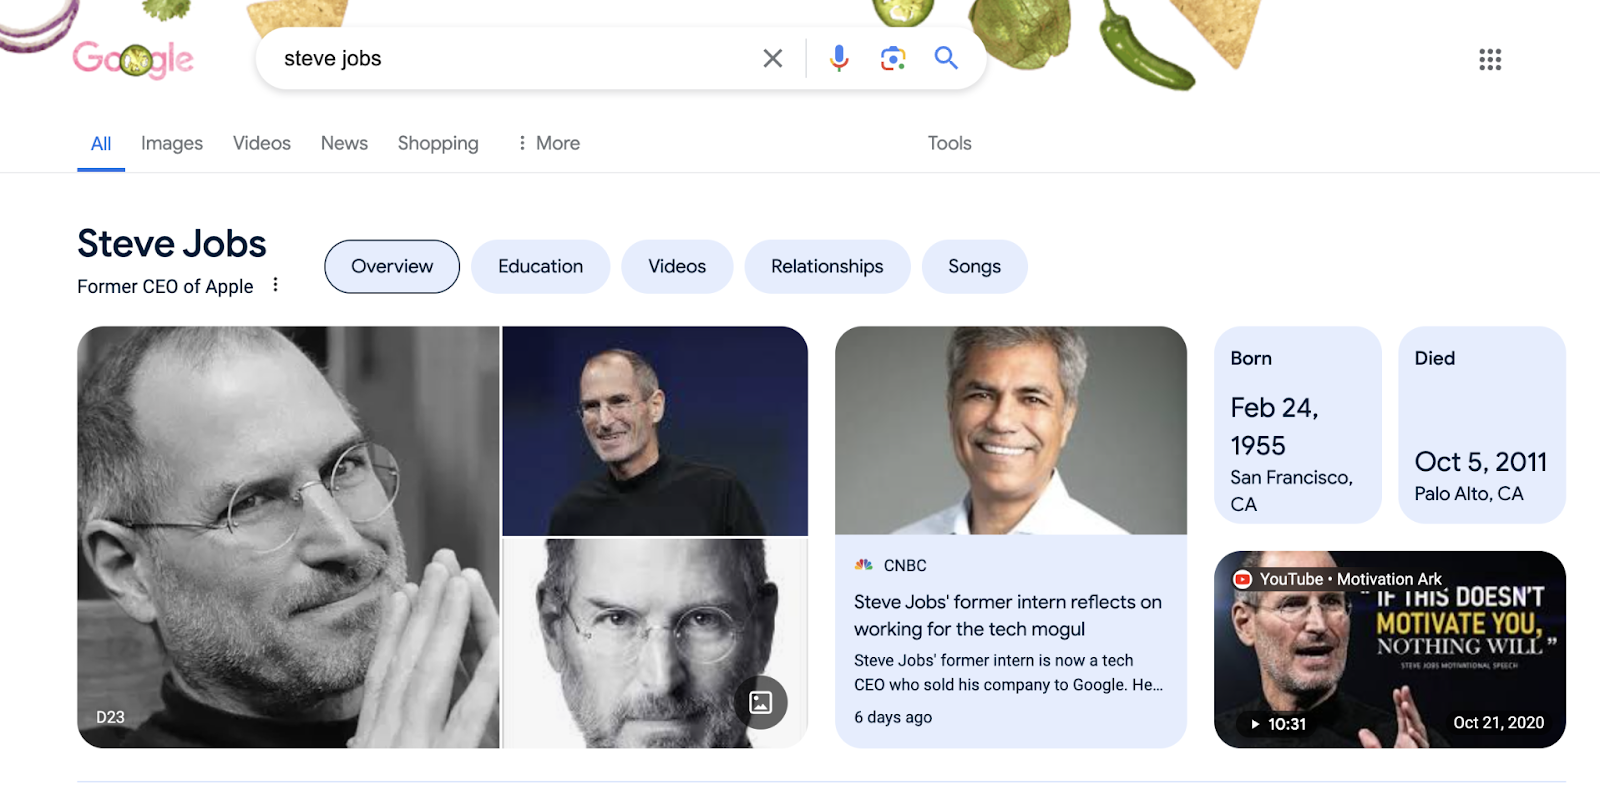 steve job knowledge panel shows information from google knowledge graph showing birth date, death date, images, news, and video